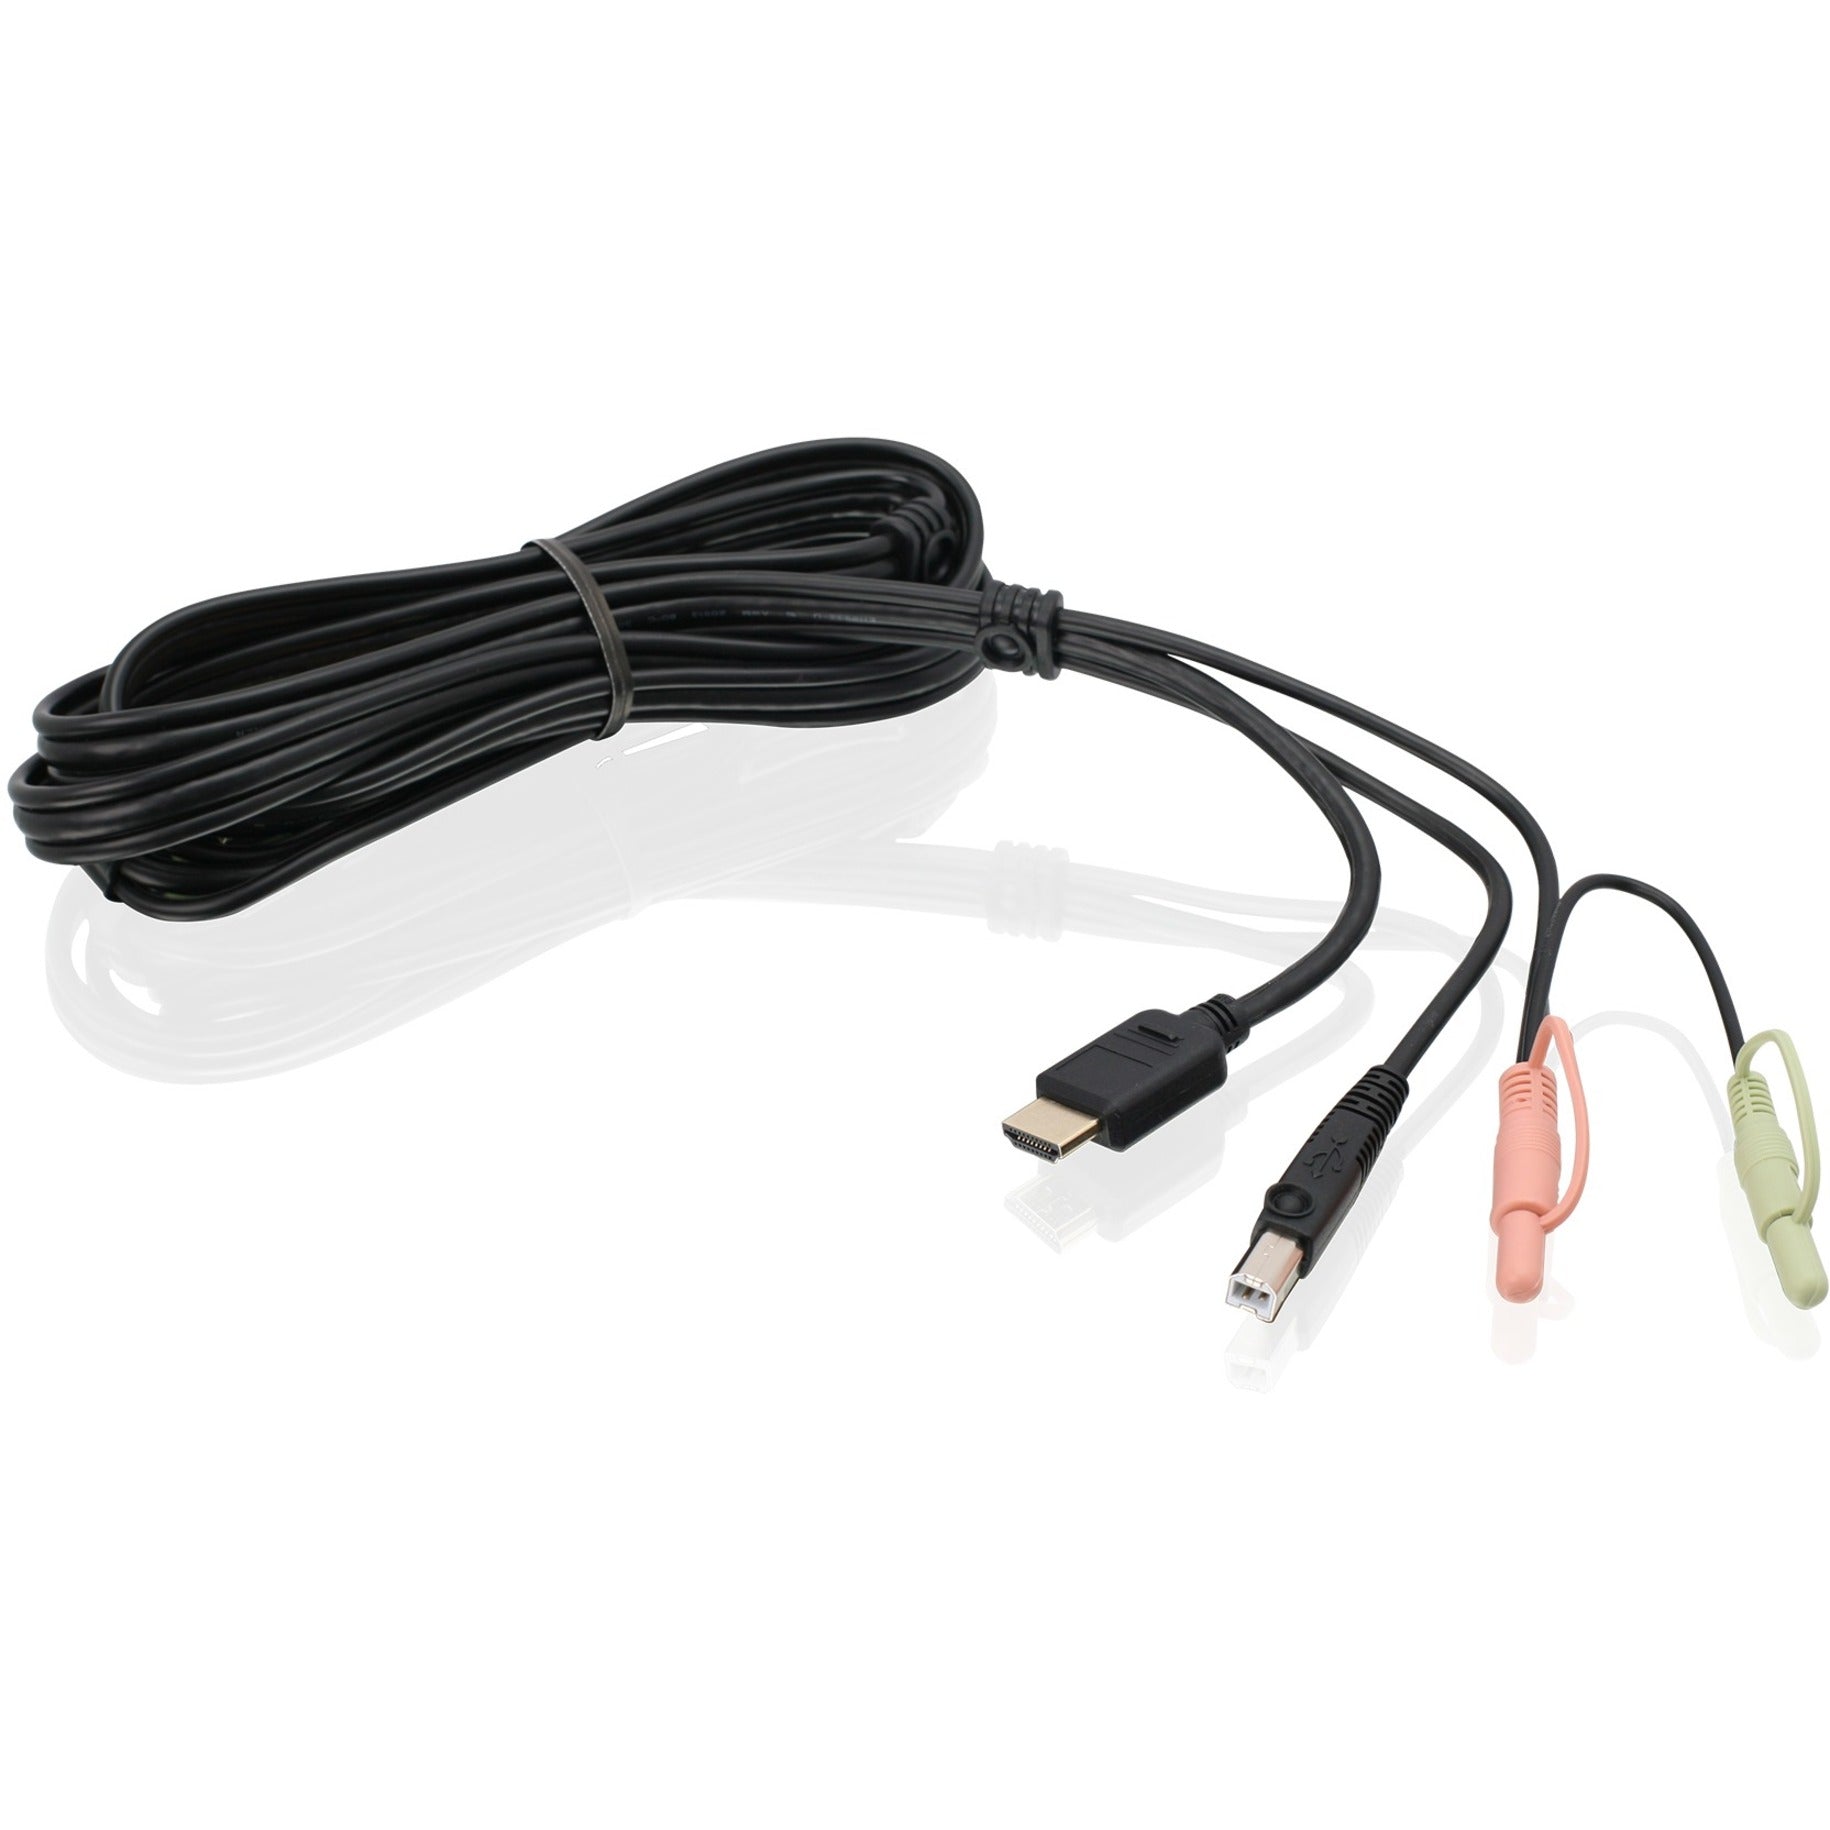 IOGEAR G2L802U 6ft HDMI KVM Cable with USB and Audio, TAA Compliant